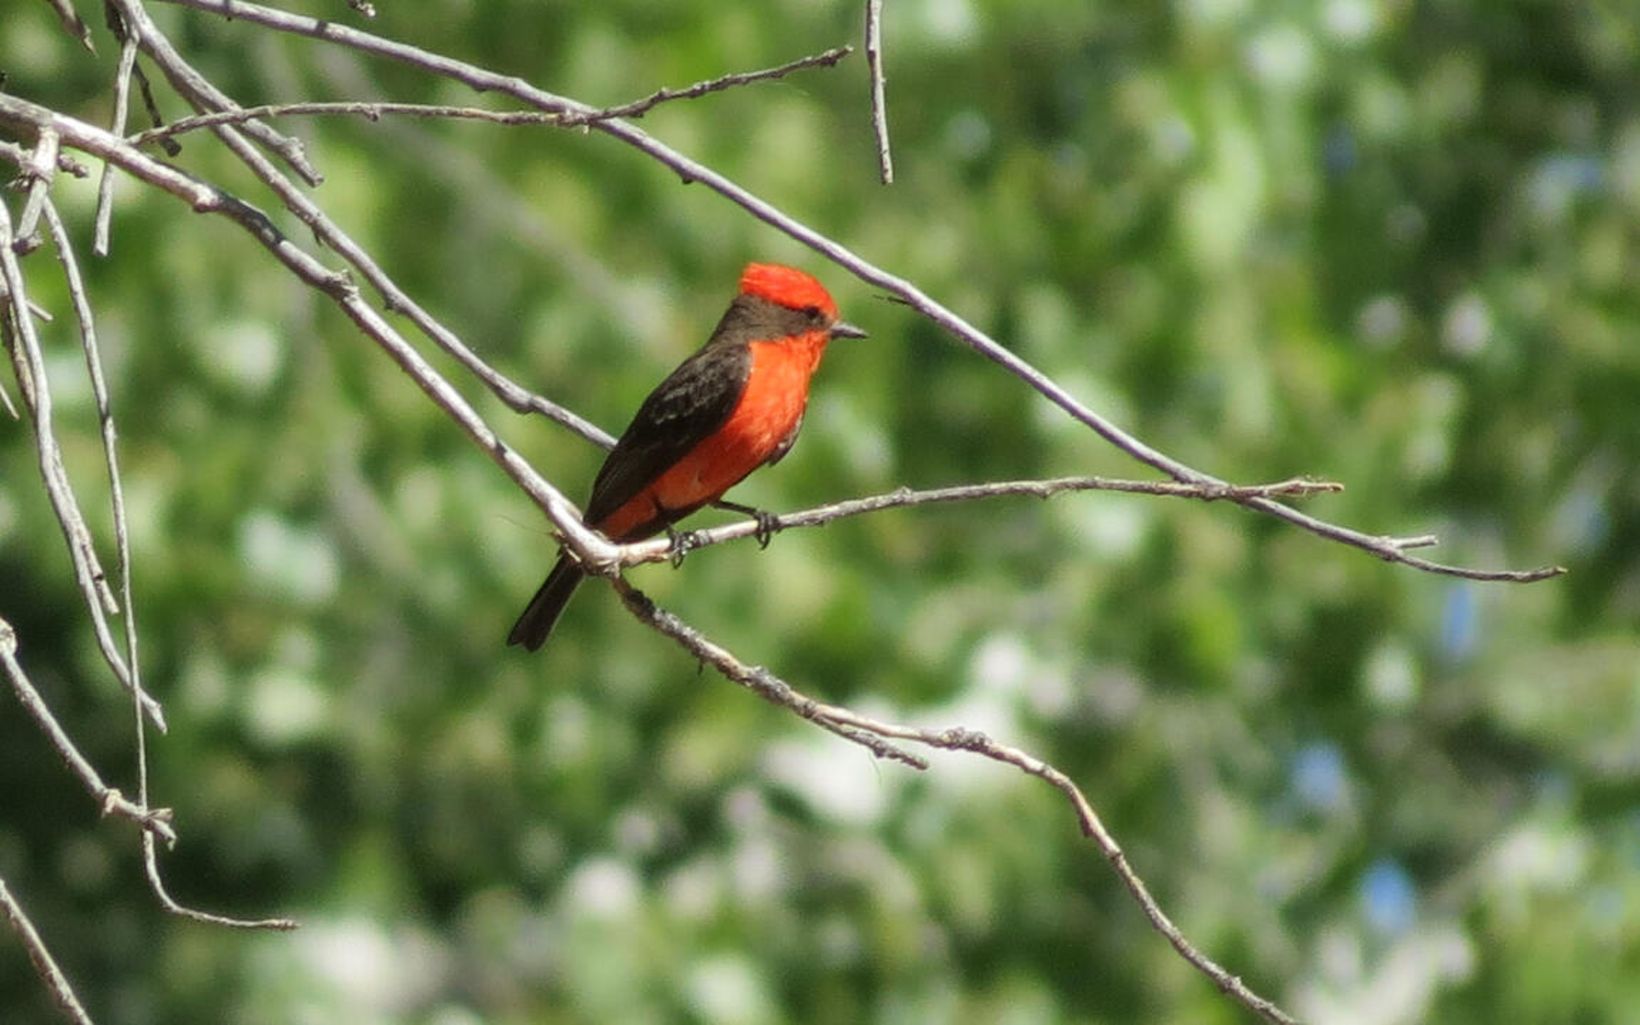 A vermilion flycatcher, ared bird with black wings, perches on a tree branch.